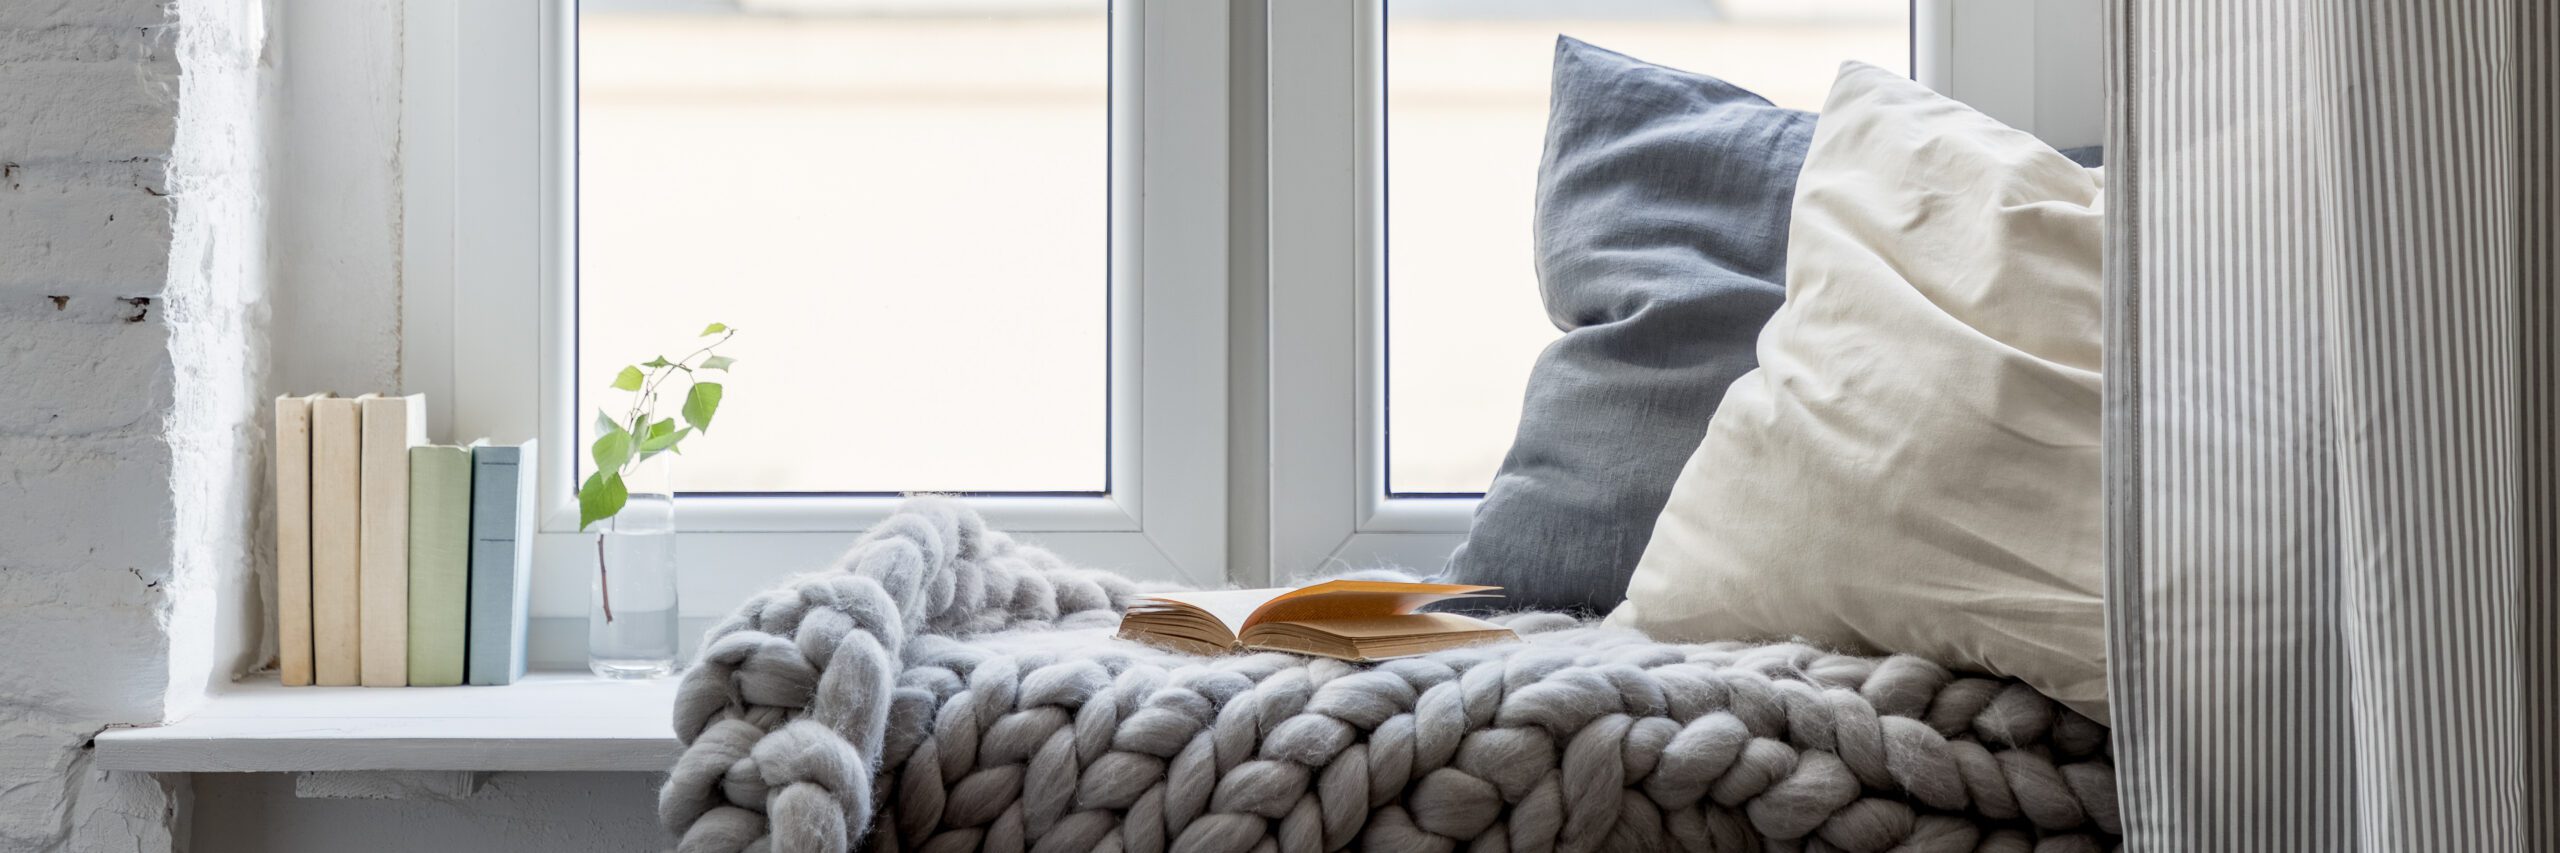 Hygge: Relaxation area with books, pillows and cozy blanket on a wooden windowsill, panorama